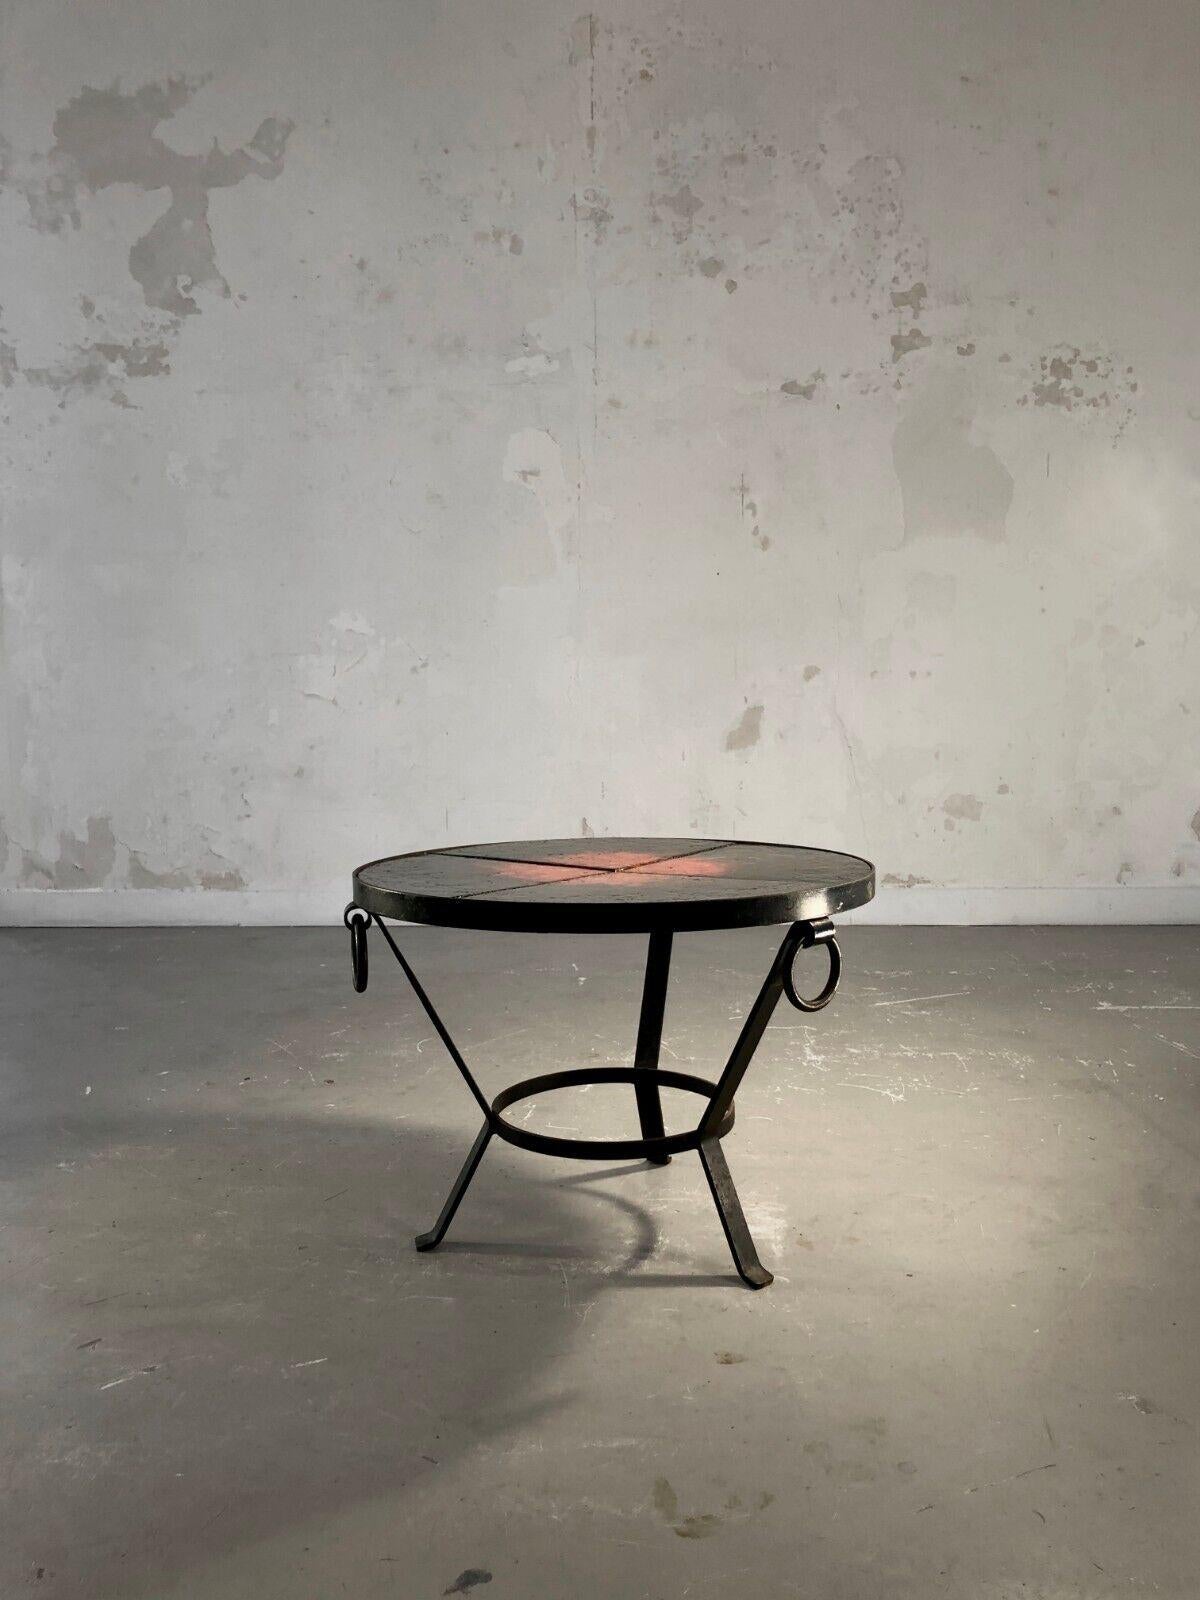 A rigorous coffee table or low tripod pedestal table, bedside or end table, Modernist, rigorous black wrought iron structure, circular top in enameled lava stone with superb glowing decoration on a black background of volcanic inspiration, made in 4